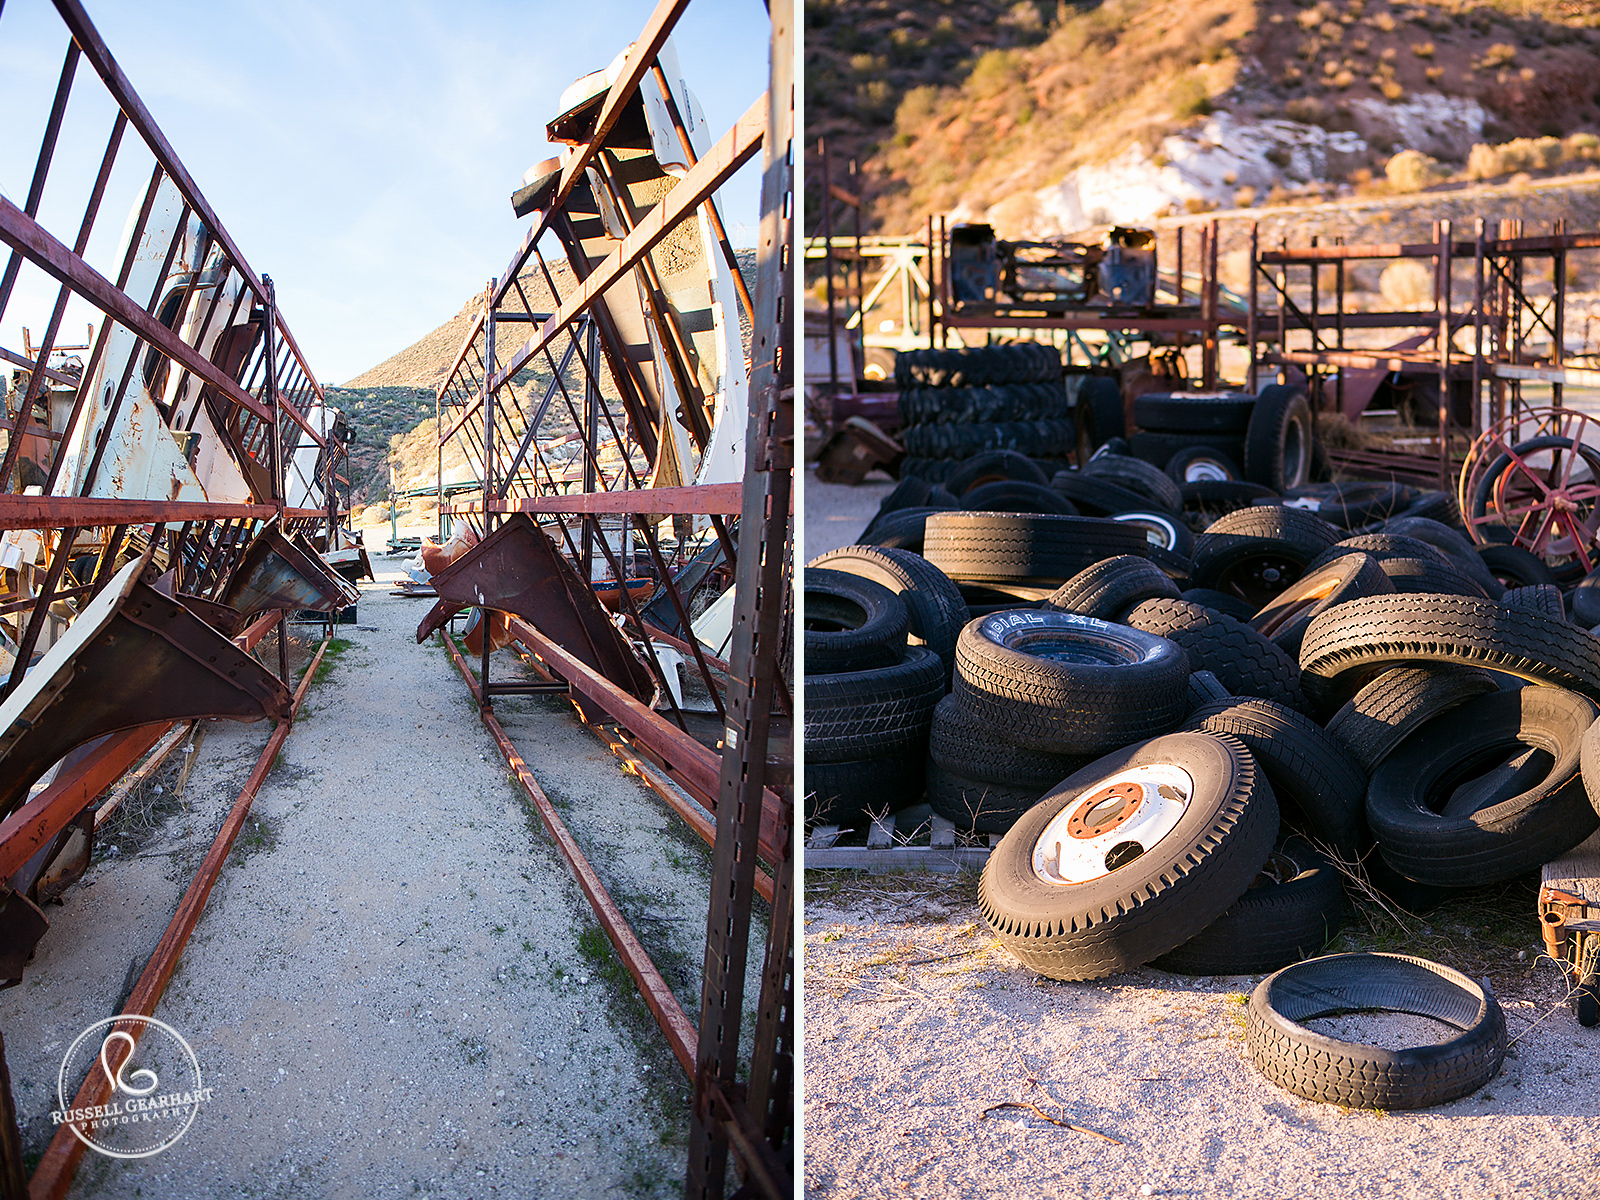 Vintage Car Graveyard Engagement Location – Unique LA Wedding Location: Middleton Ranch – Russell Gearhart Photography – www.gearhartphoto.com